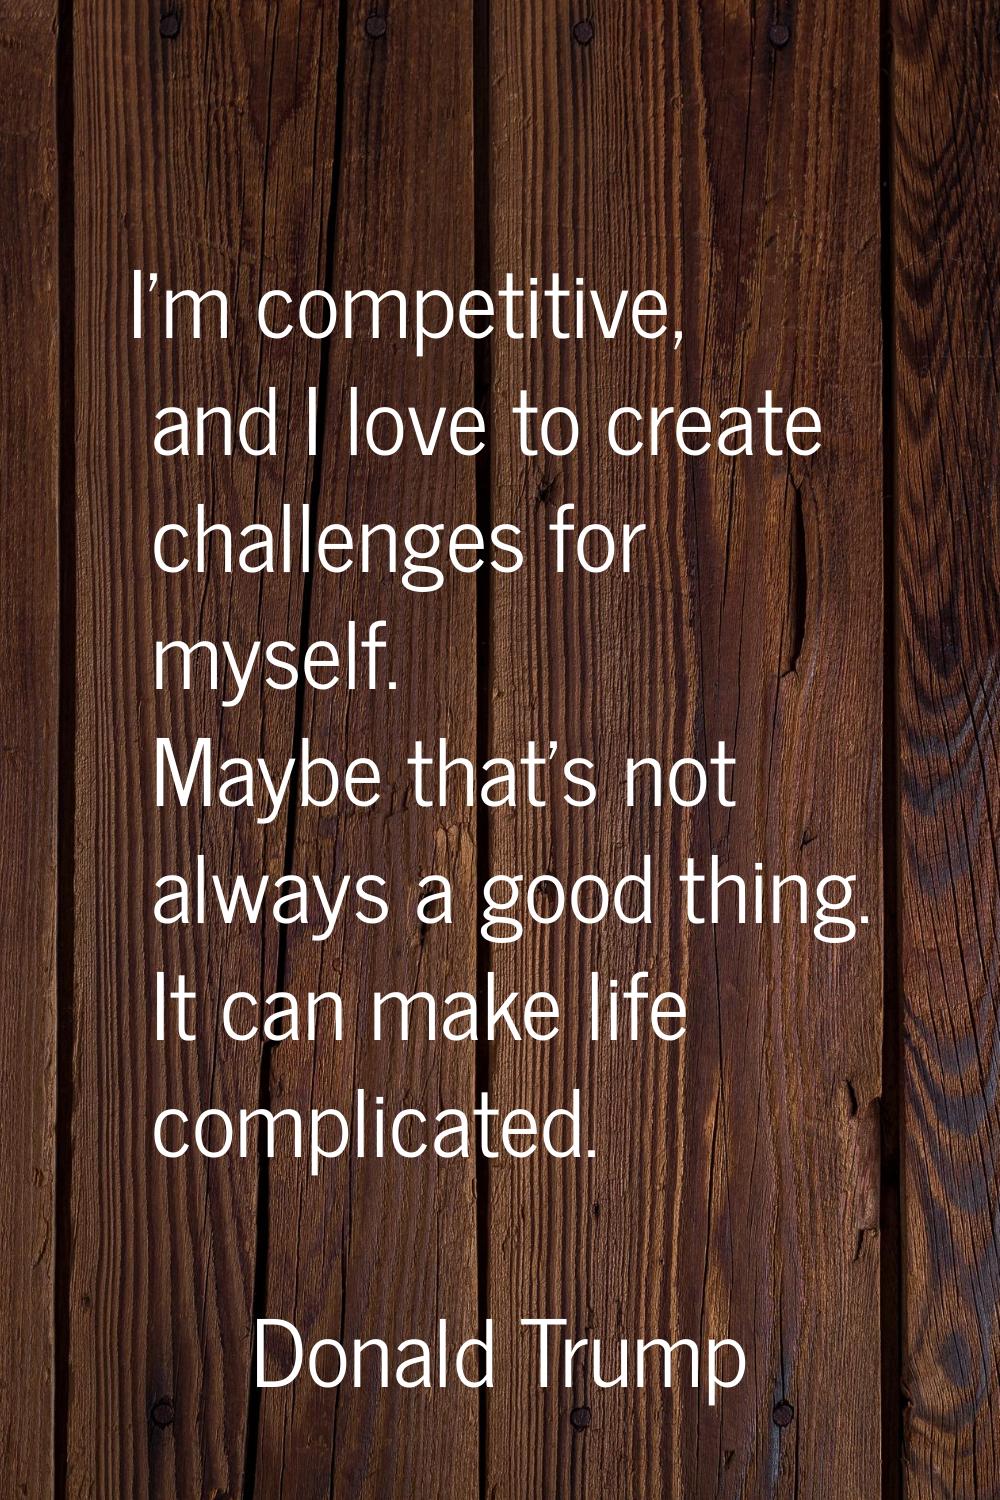 I'm competitive, and I love to create challenges for myself. Maybe that's not always a good thing. 